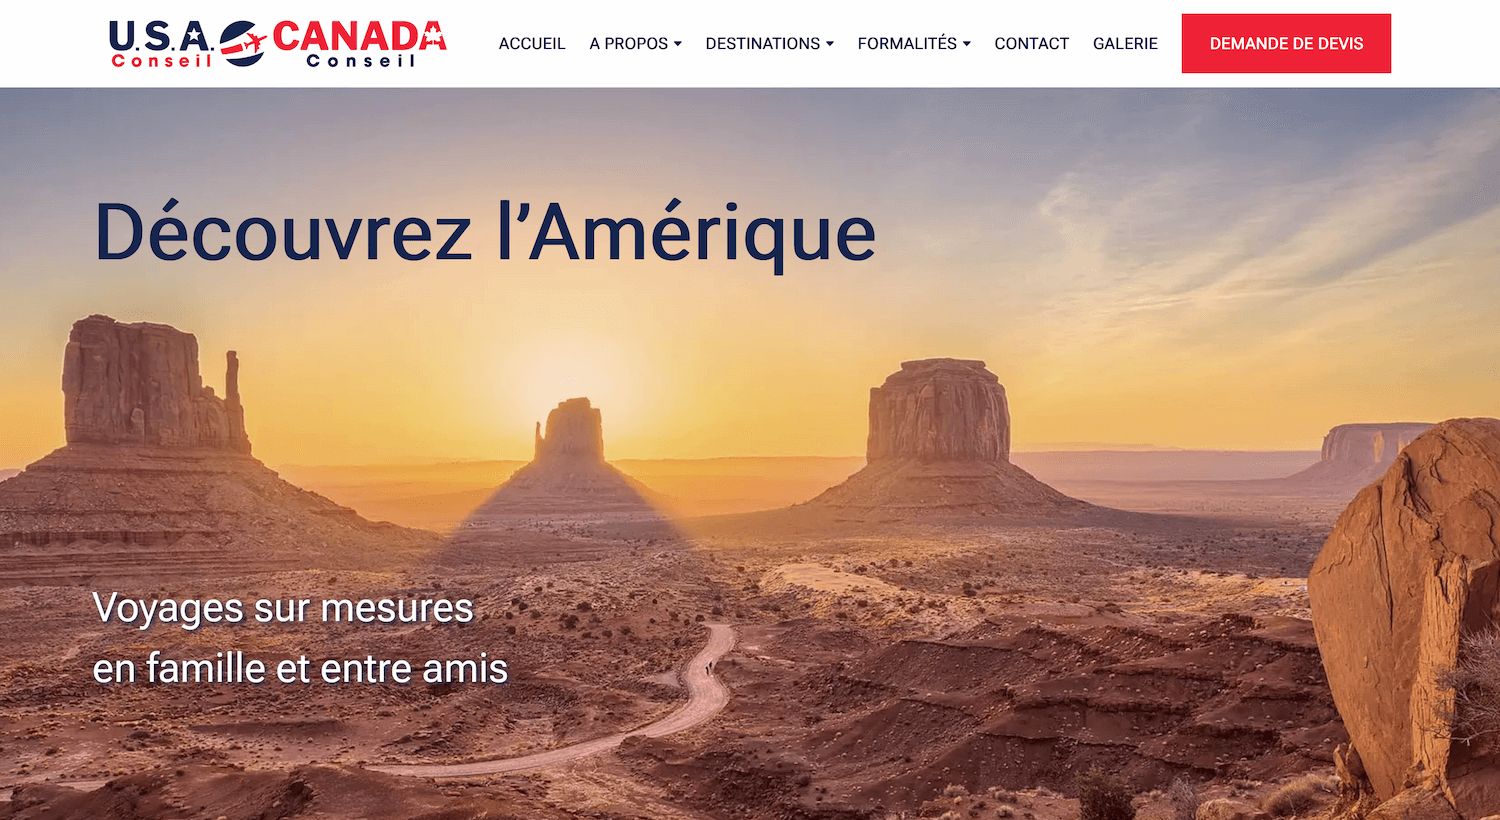 Work sample - full website redesign with WordPress for travel agency USA Conseil